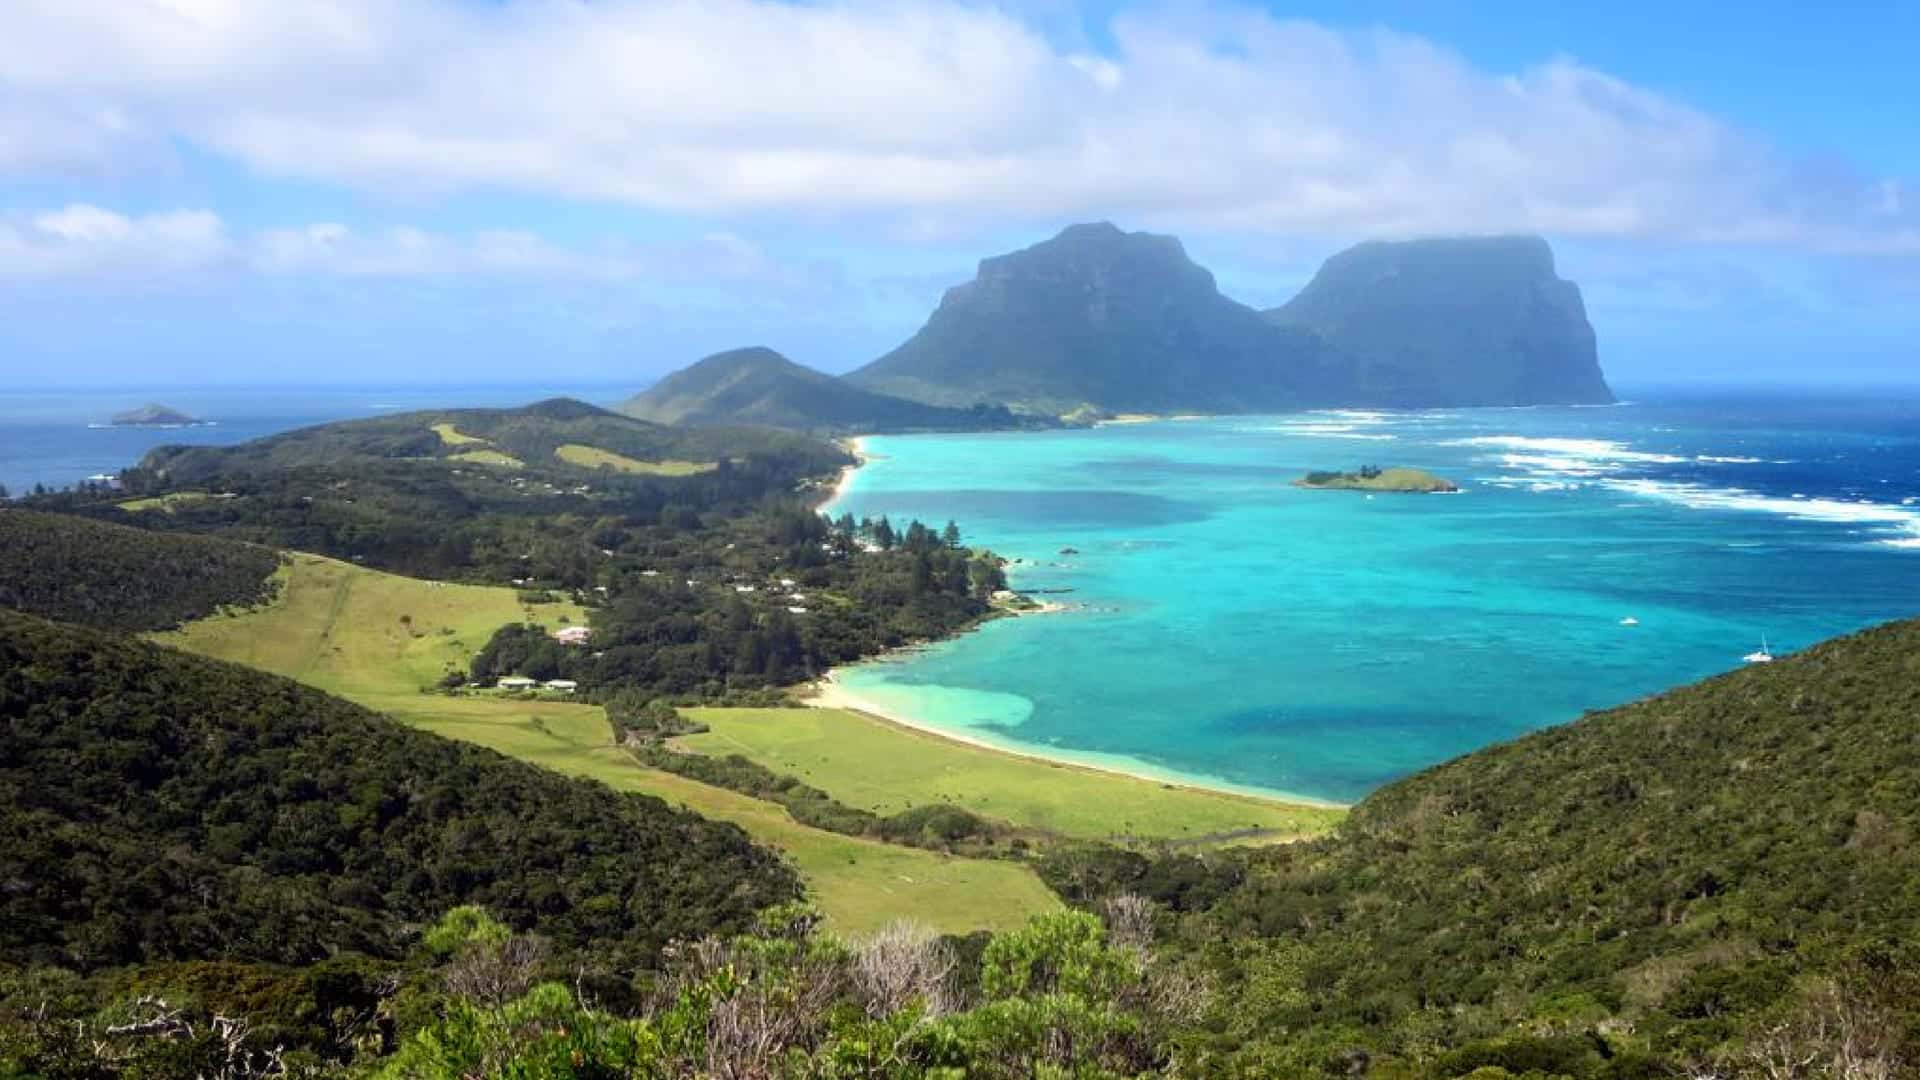 Visit Australia for: The Tropical beauty of mountain and sea - Lord Howe Island